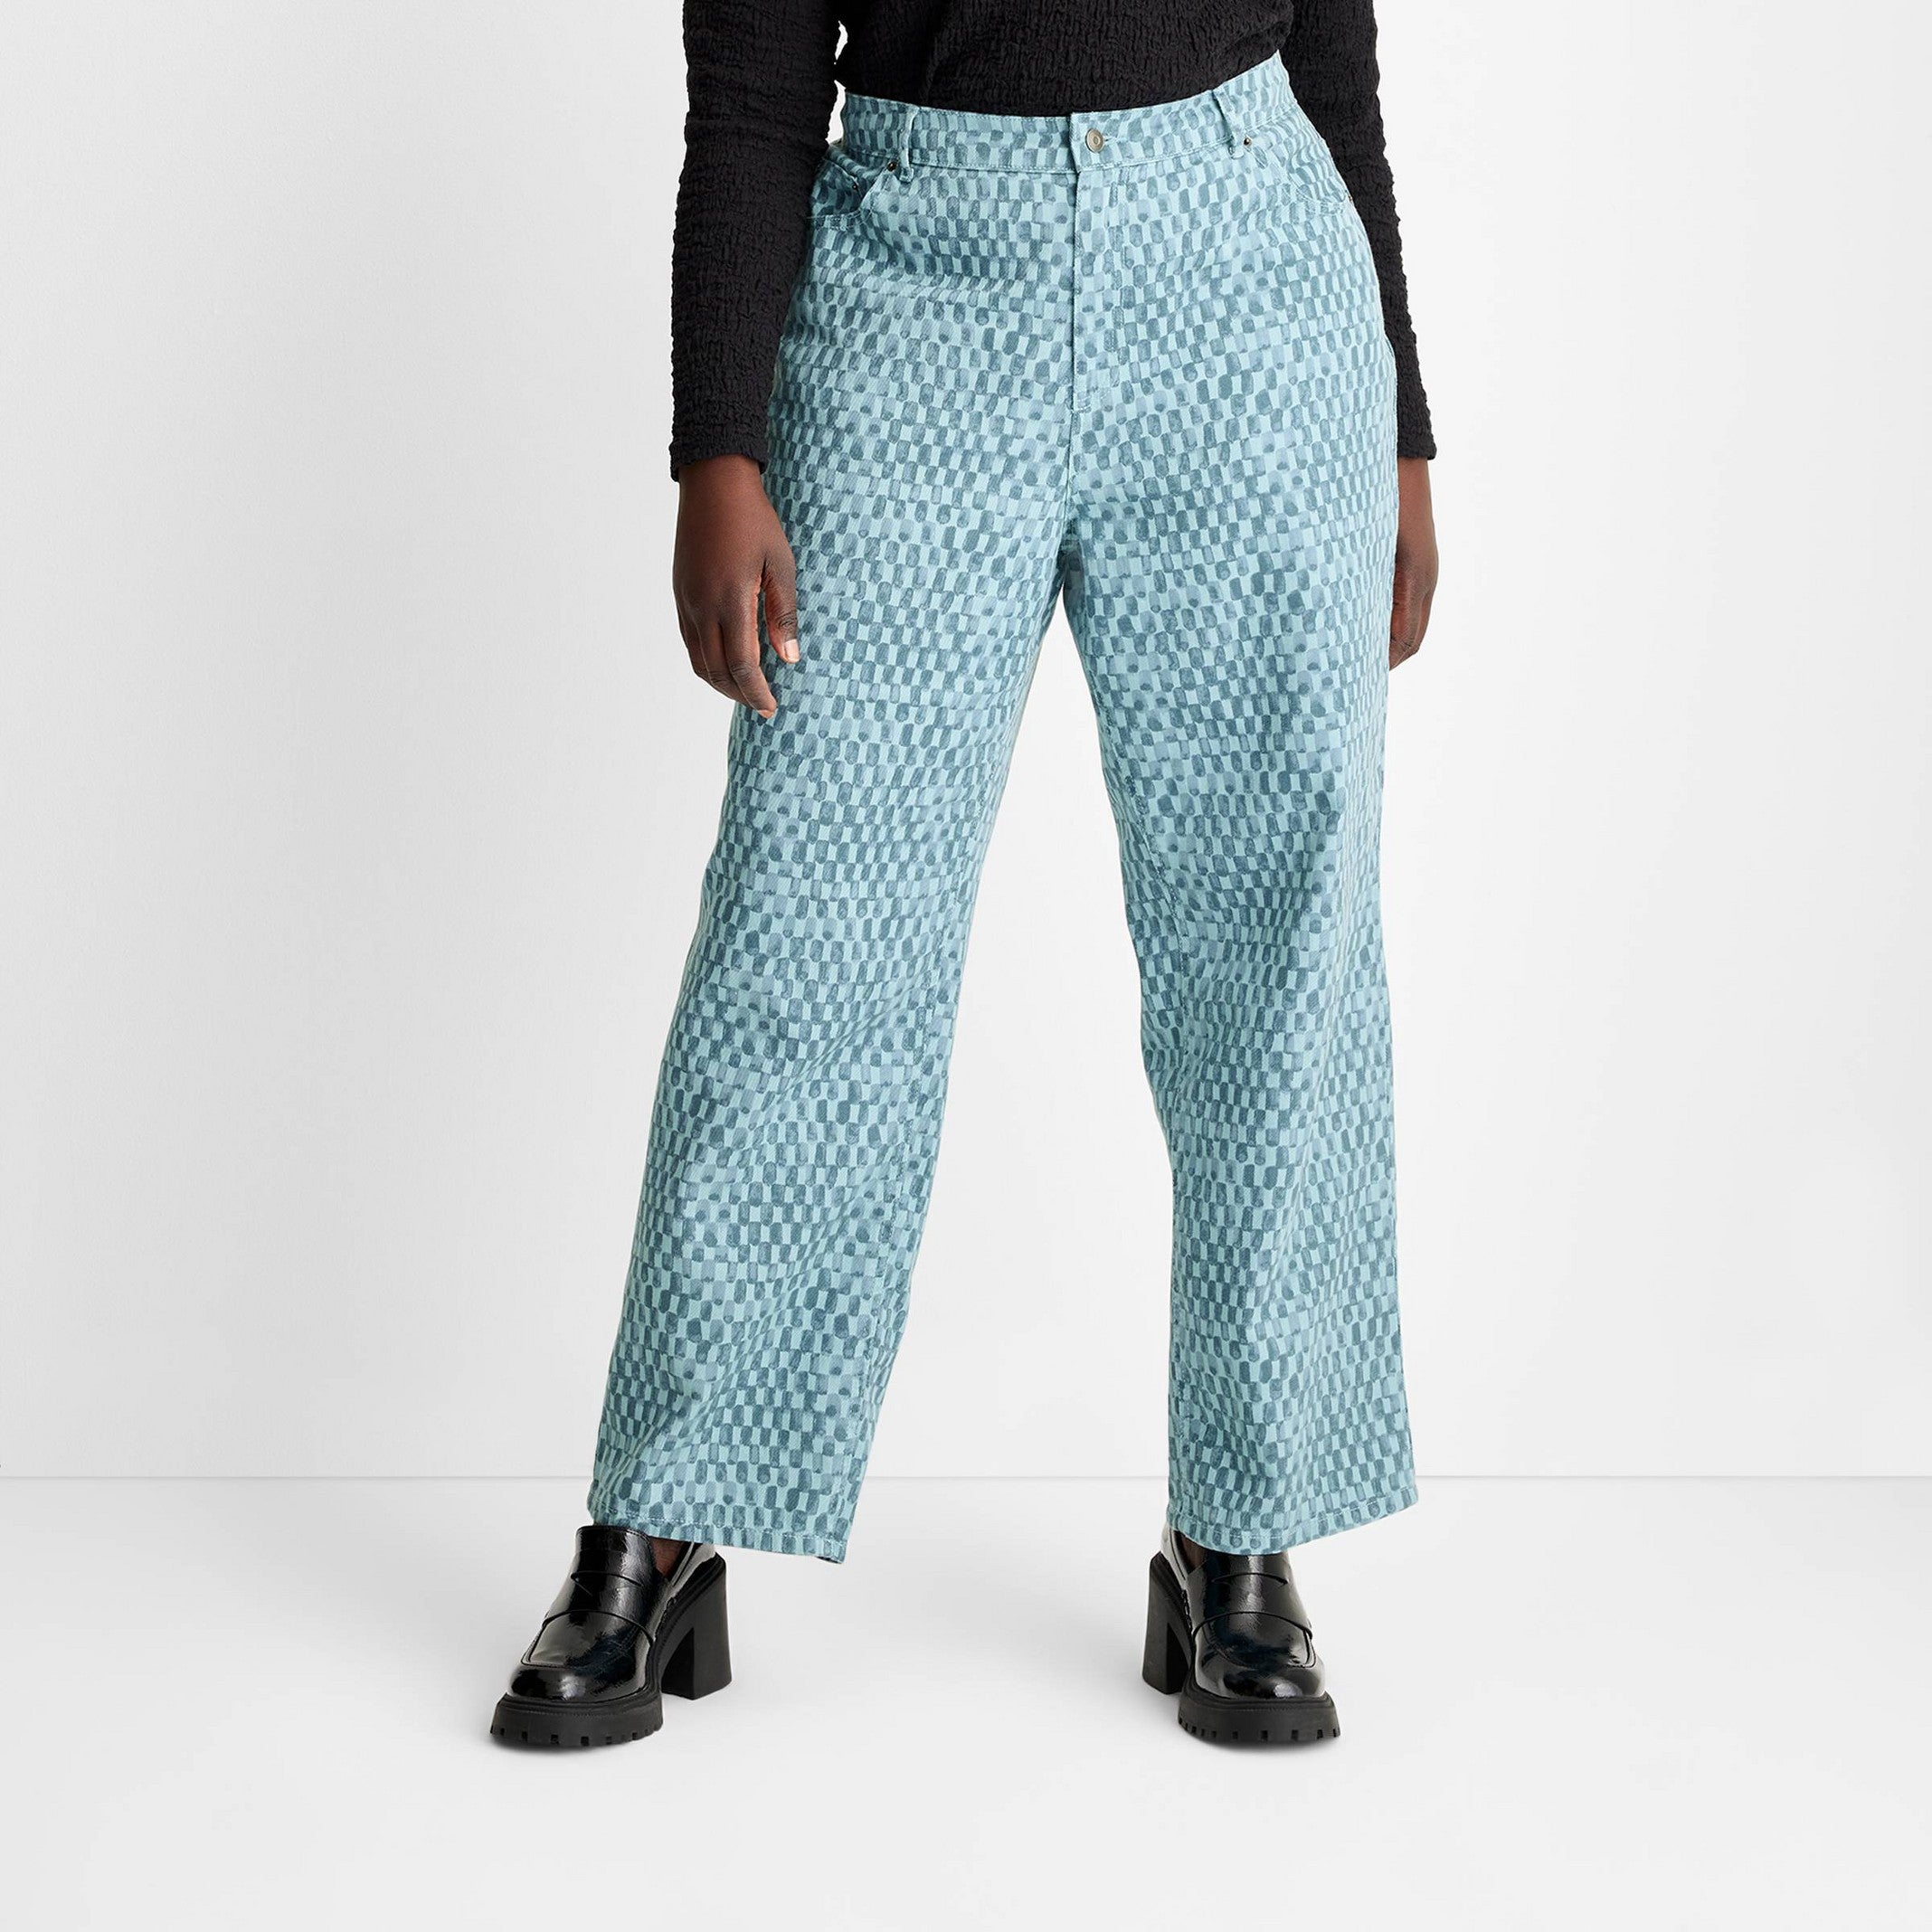 Buy Guess women straight fit checkered denim pants black white Online |  Brands For Less